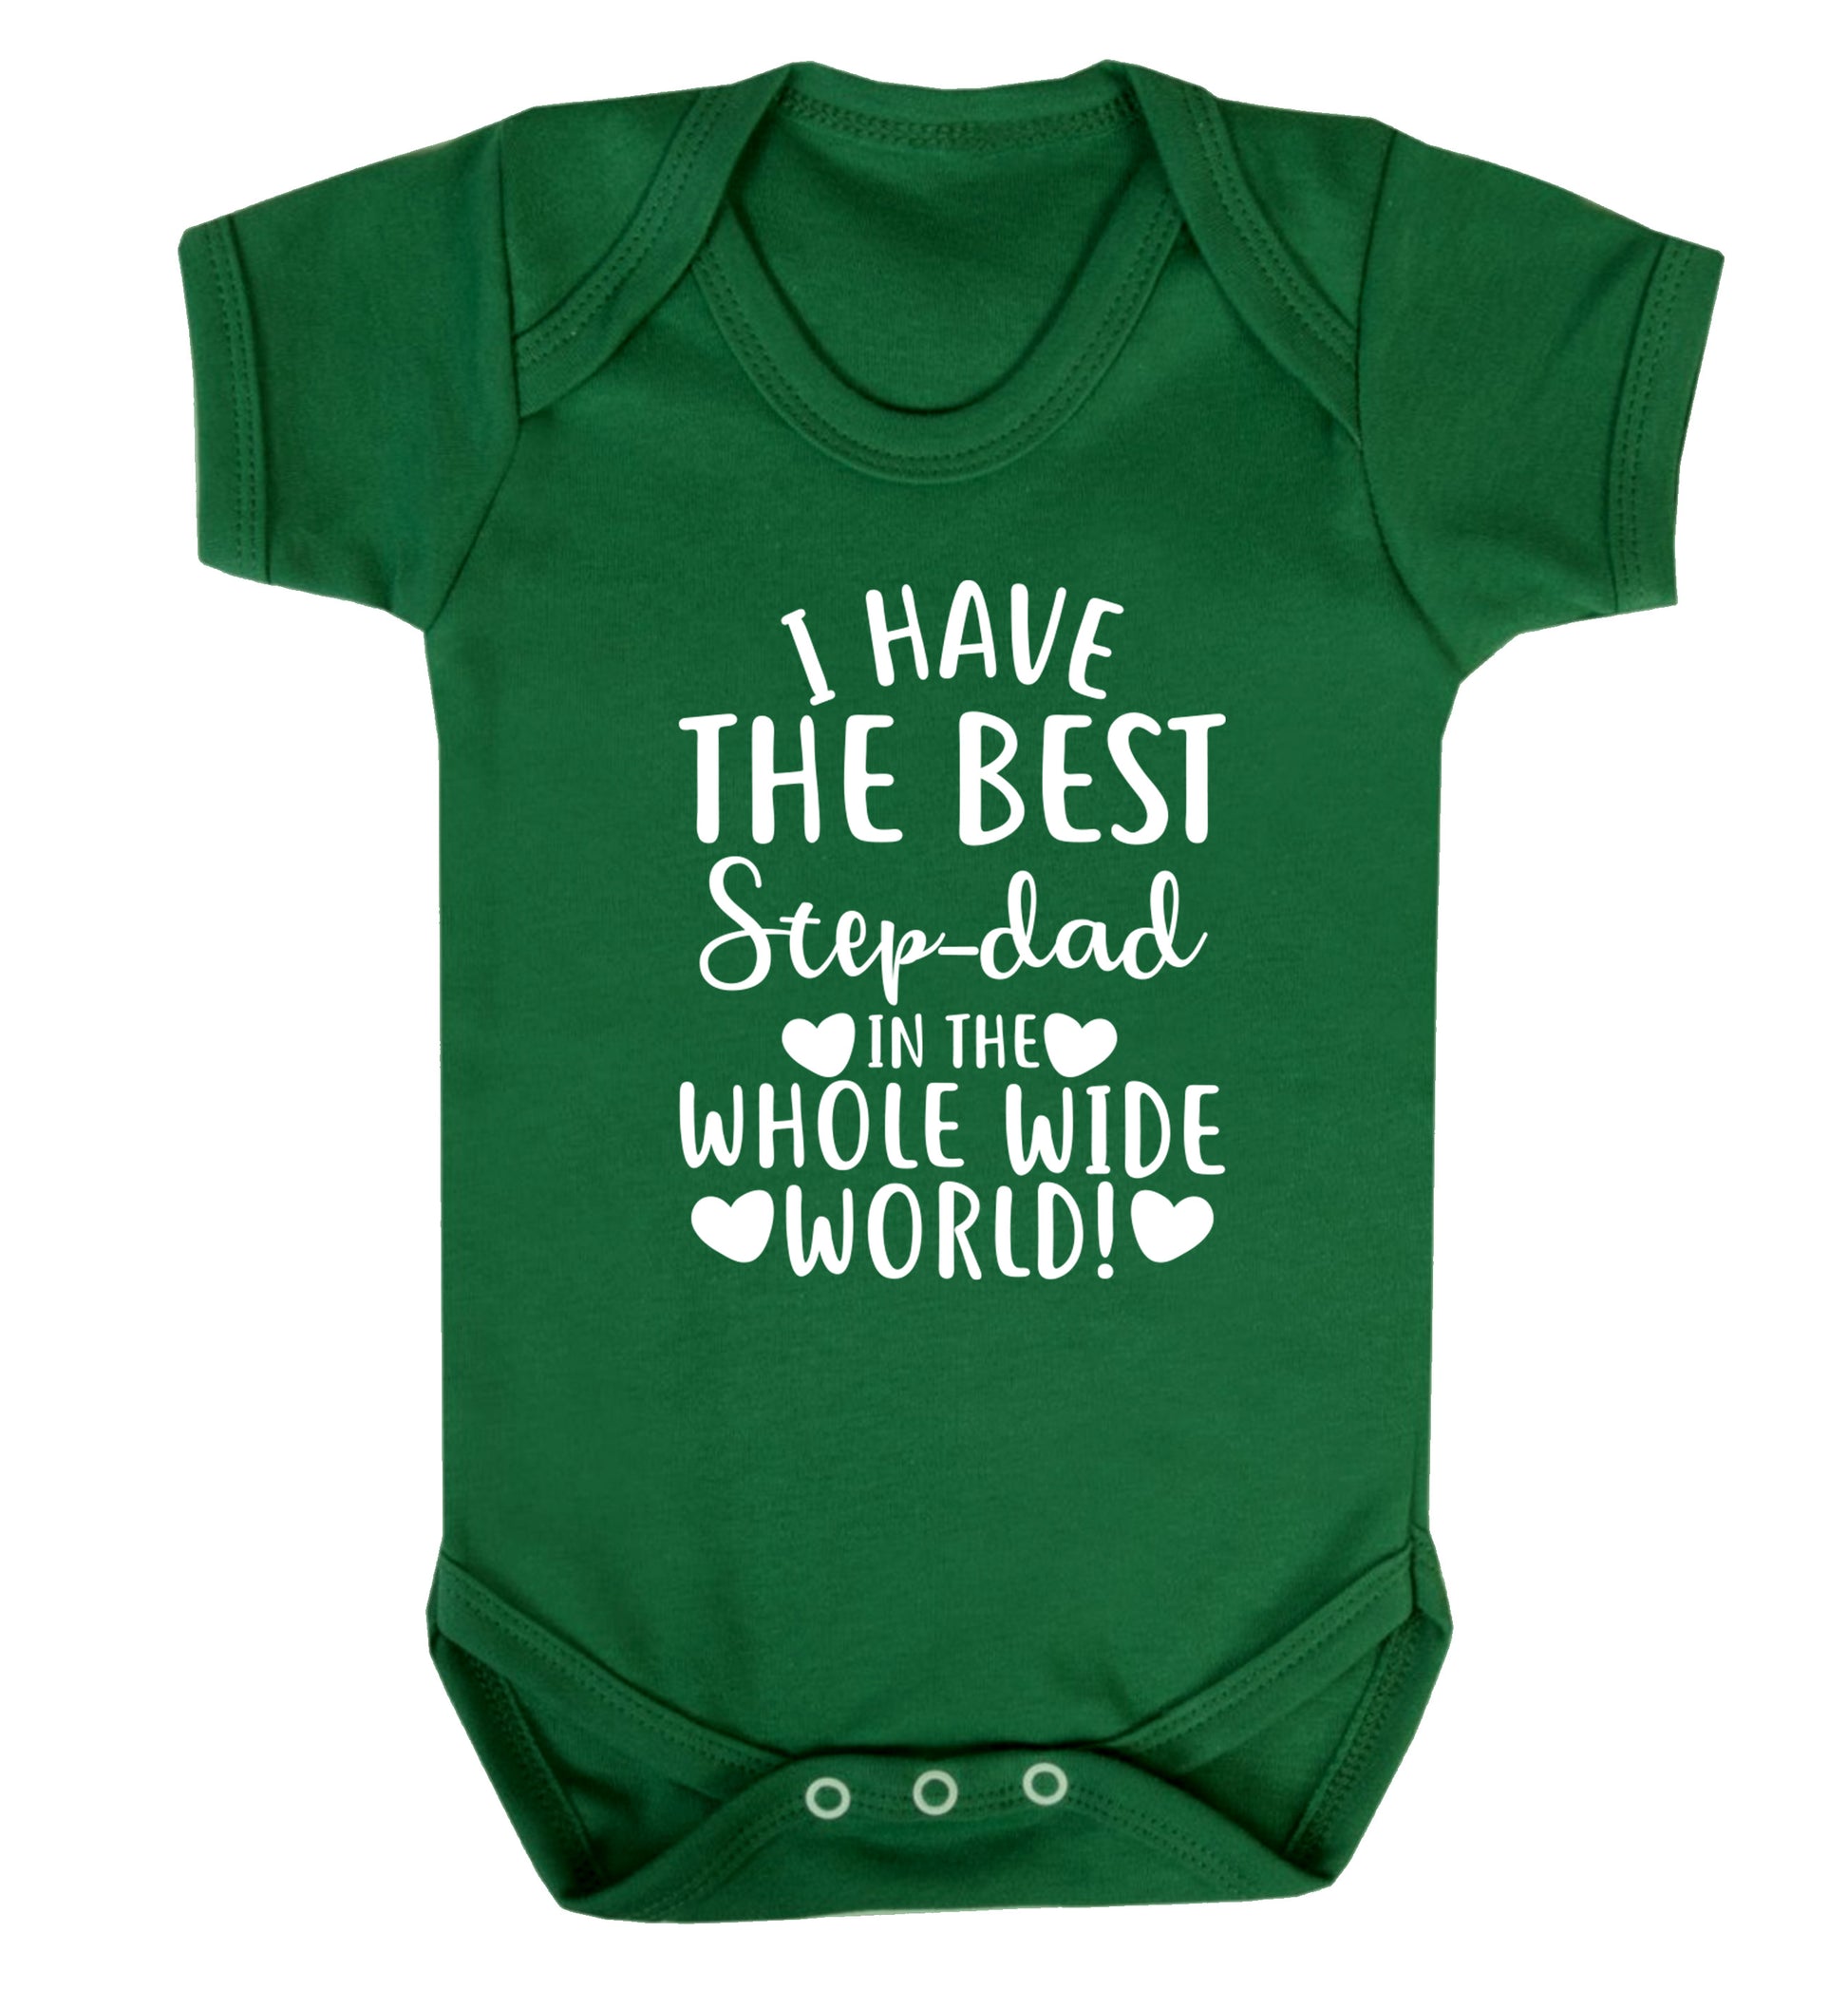 I have the best step-dad in the whole wide world! Baby Vest green 18-24 months